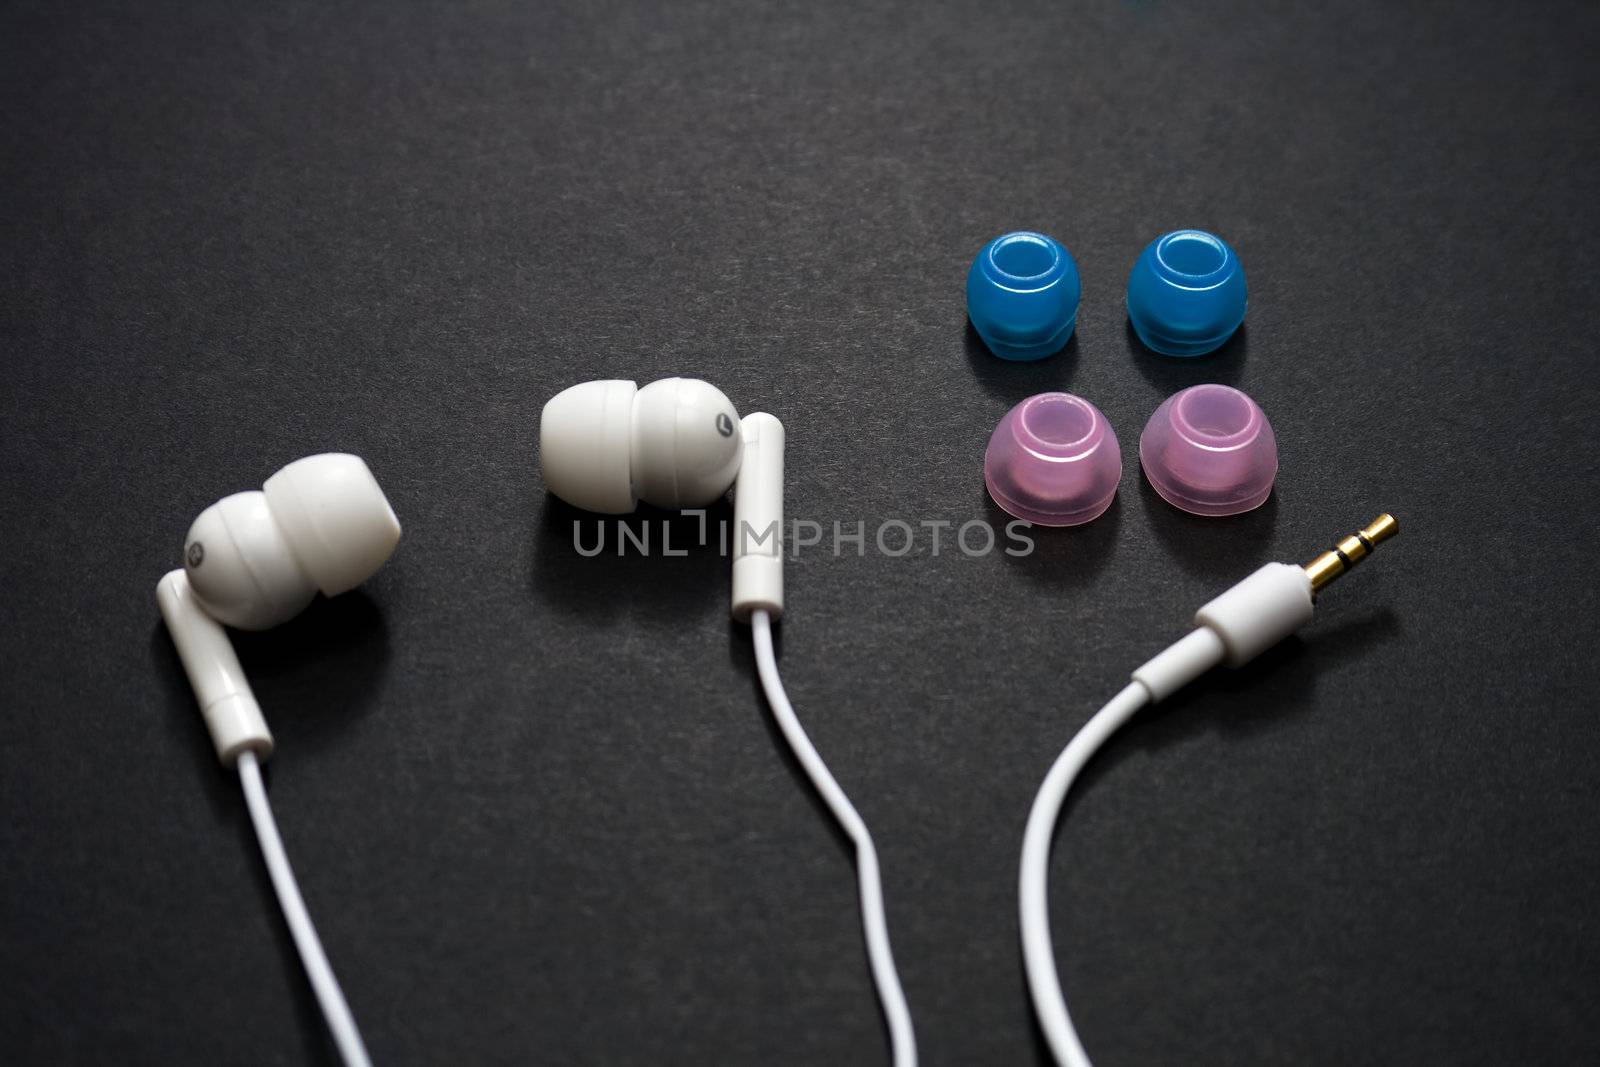 White earbuds and spare parts on a dark background